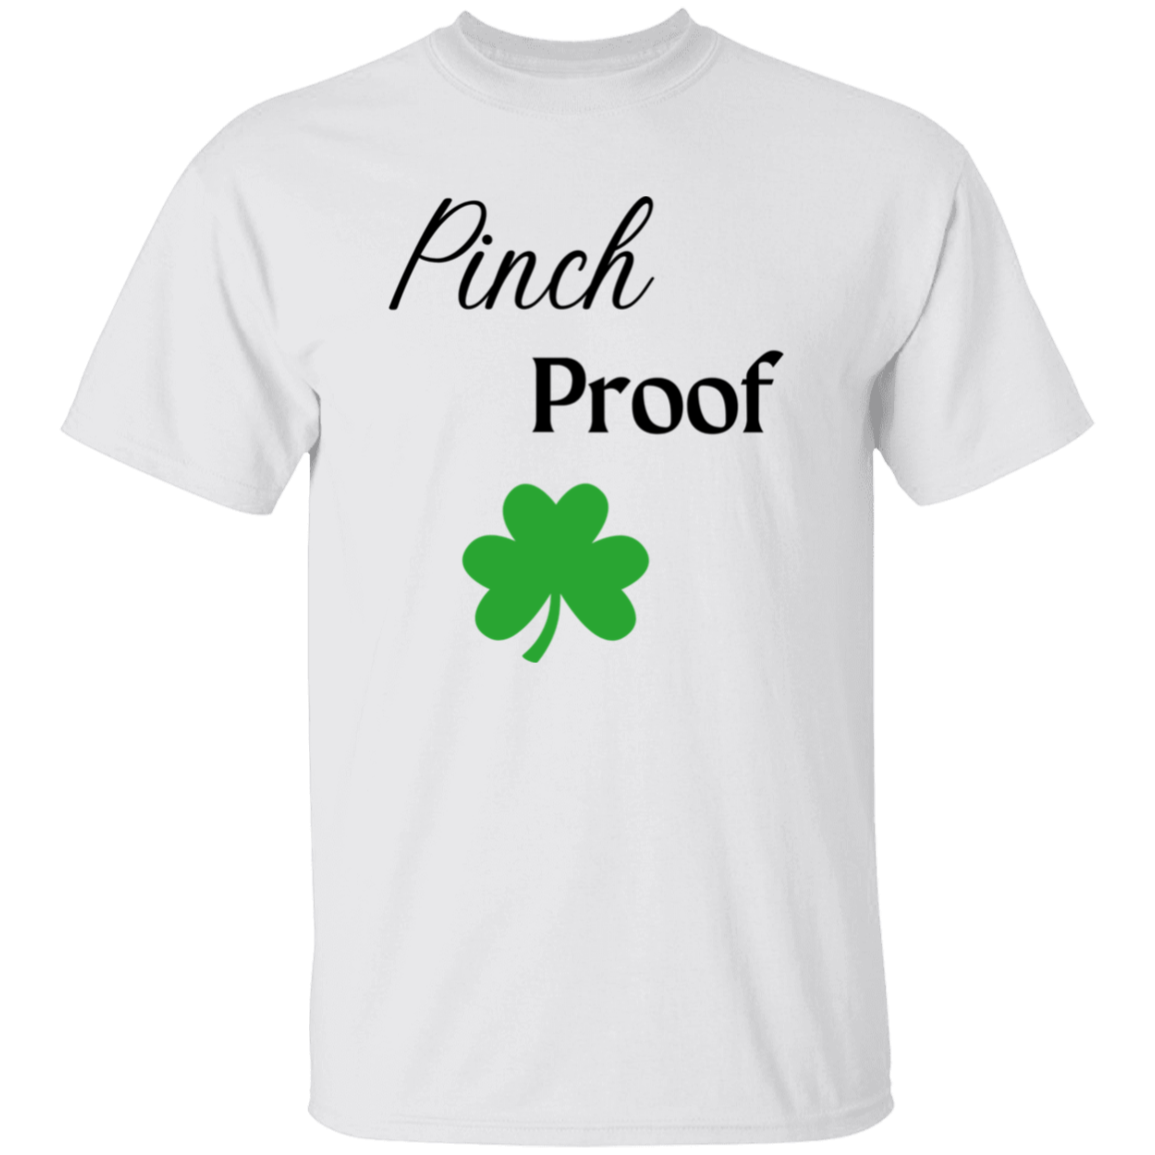 Youth Pinch Proof T-Shirt